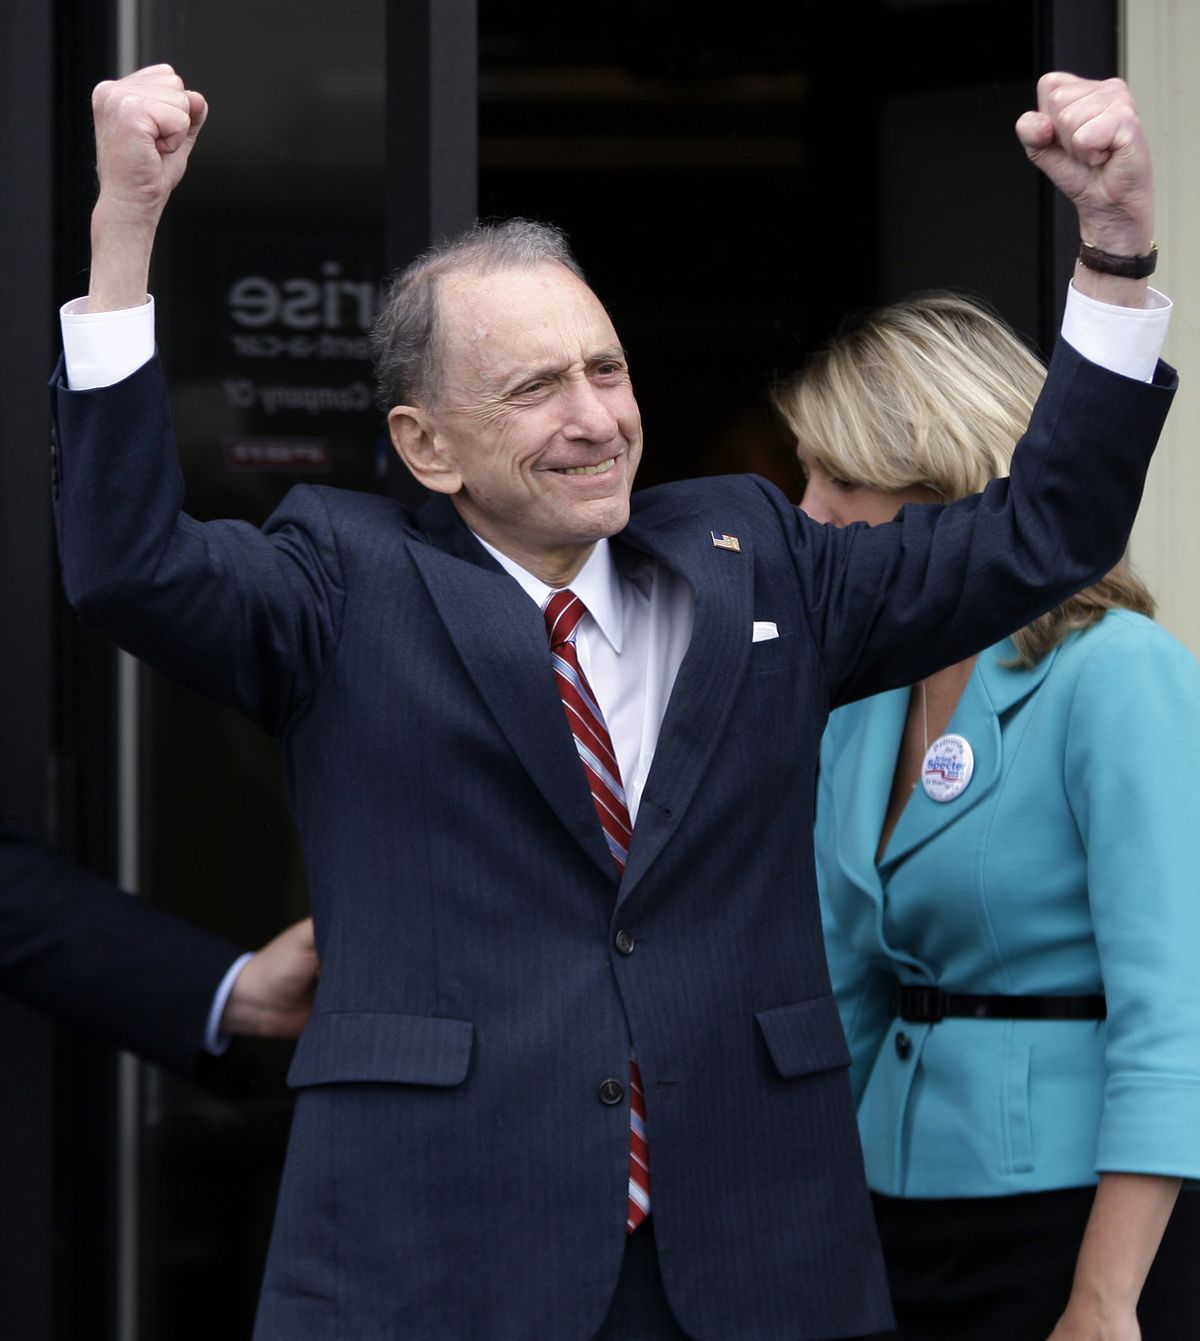 FILE - In this May 17, 2010 file photo, Sen. Arlen Specter, D-Pa. campaigns  in New Cumberland, Pa.  Former U.S. Sen. Arlen Specter, longtime Senate moderate and architect of one-bullet theory in JFK death, died Sunday, Oct. 14, 2012.  He was 82. (Carolyn Kaster / Associated Press)